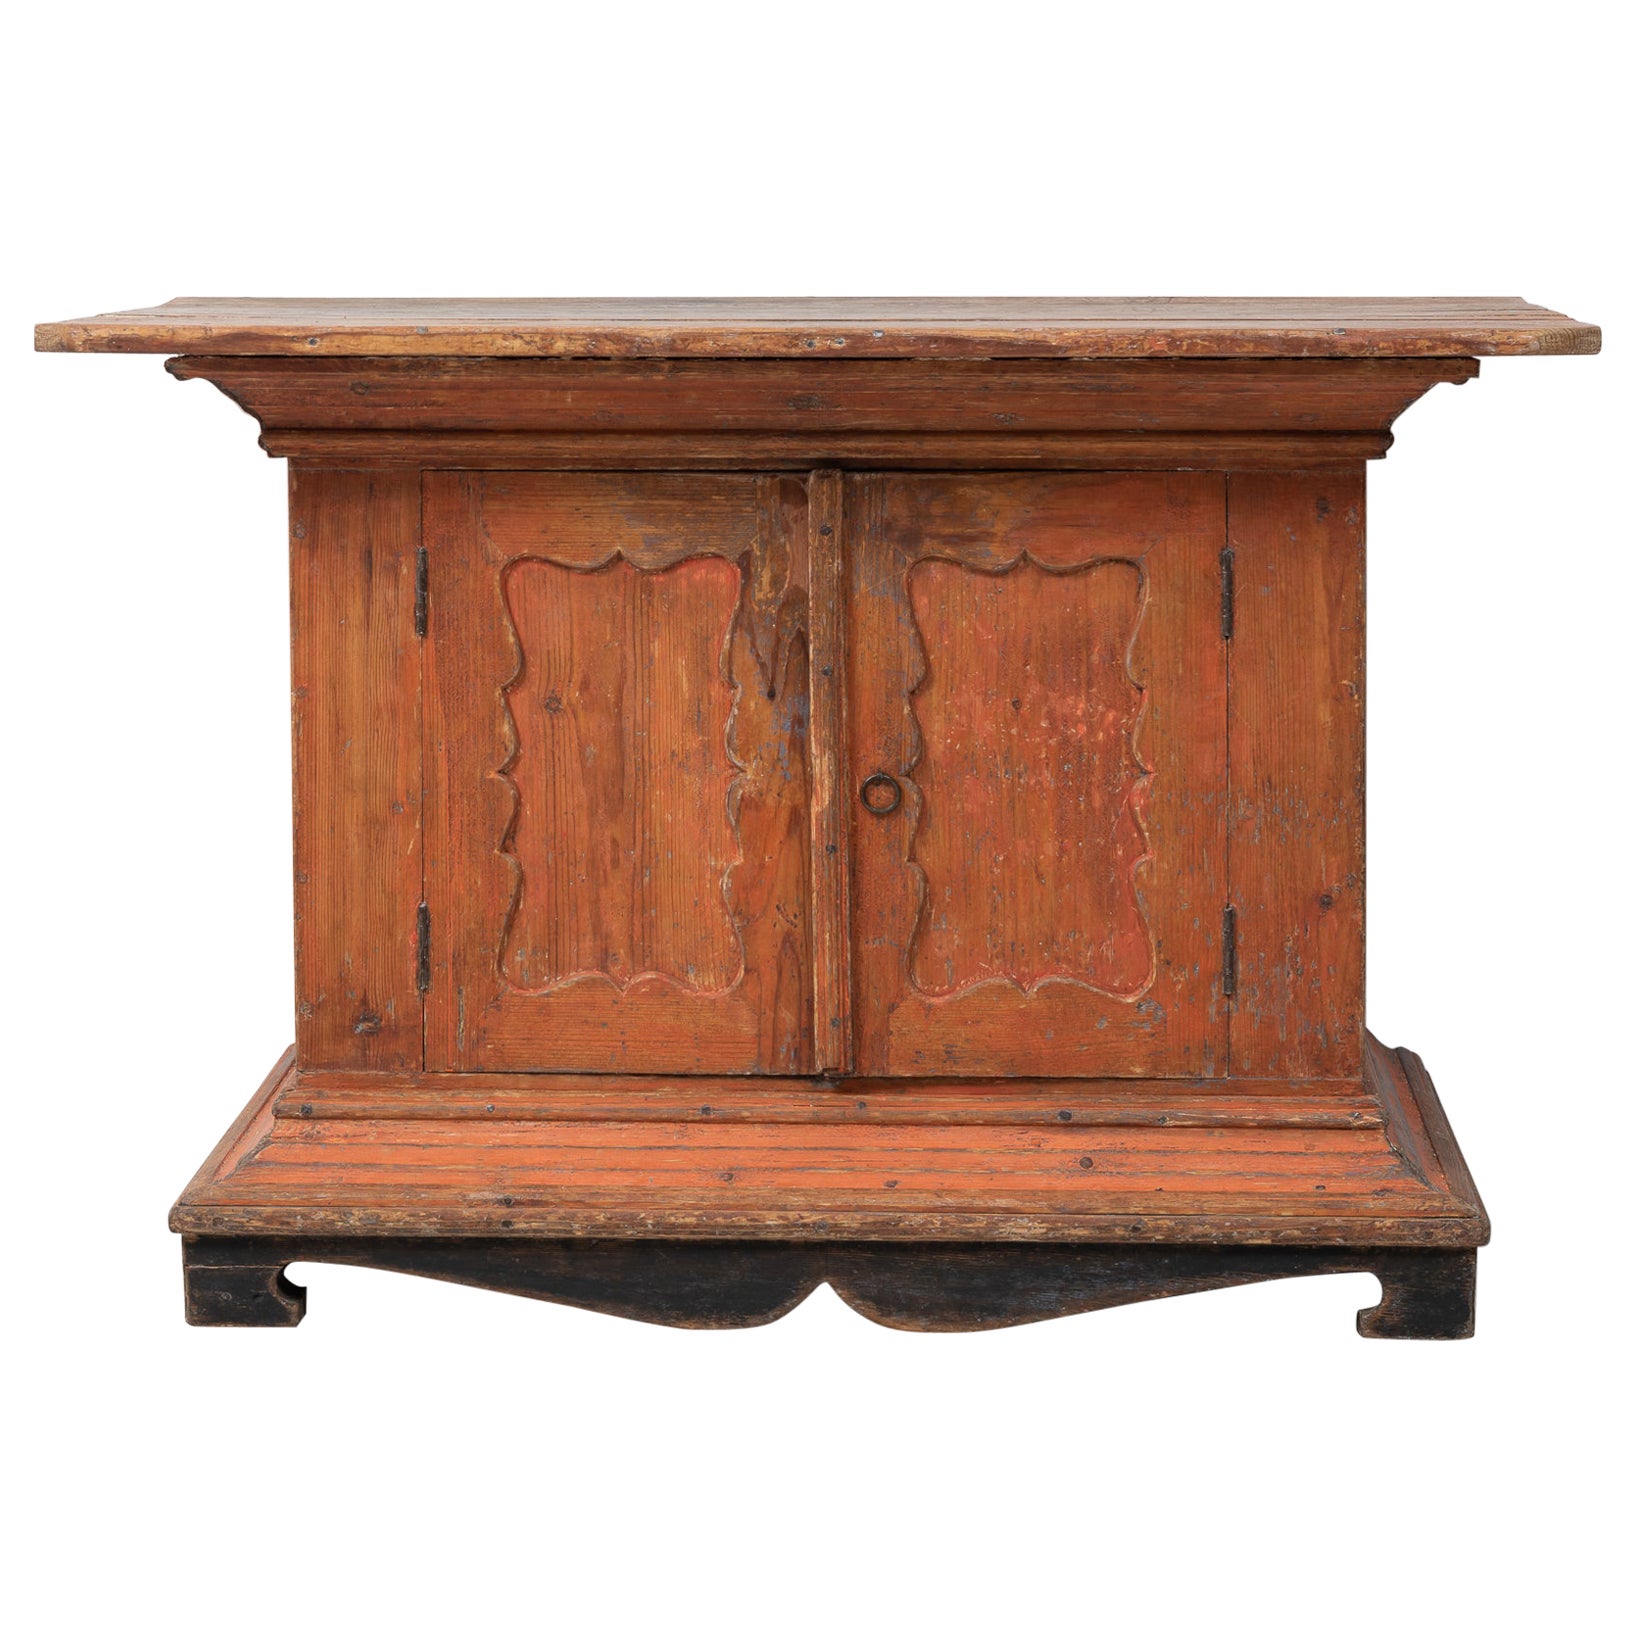 Antique Rare Swedish Folk Art Authentic Pine Rustic Sideboard For Sale